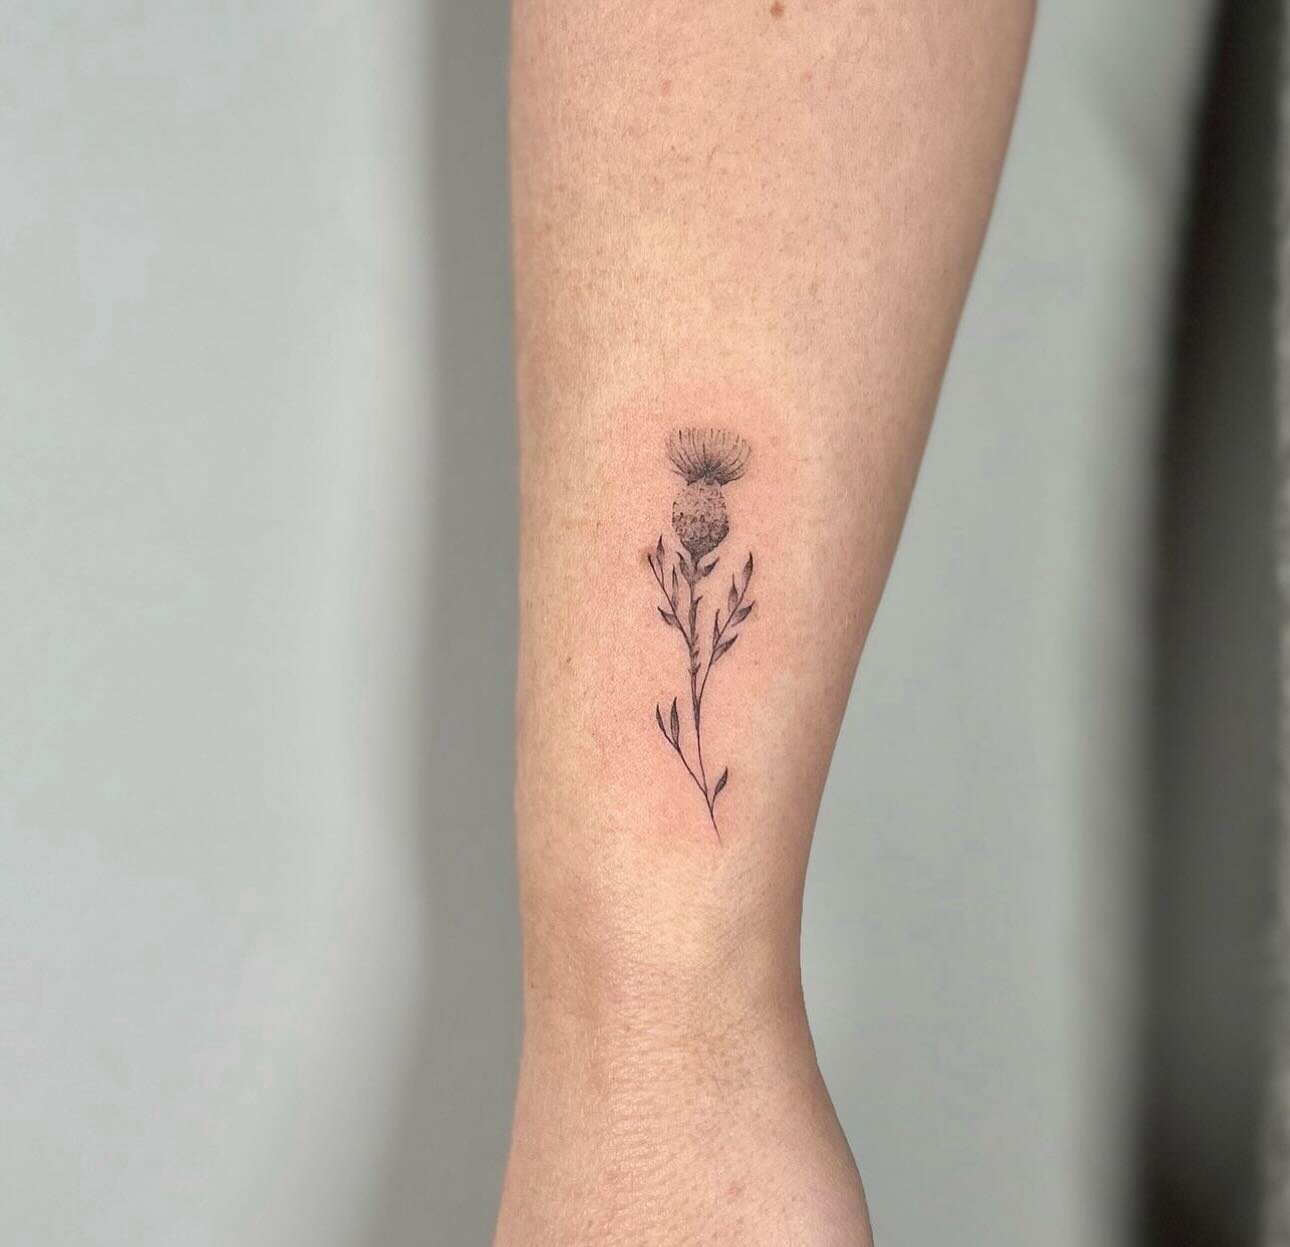 We 💜 a meaningful floral tattoo! 

@ss.inkworld did this Scottish thistle for a client the other day and we are obsessed 🔥

#durhamregion #durhamregiontattoo #durhamregionbusiness #oshawa #oshawabusiness #oshawatattoos #torontotattoos #torontotatto